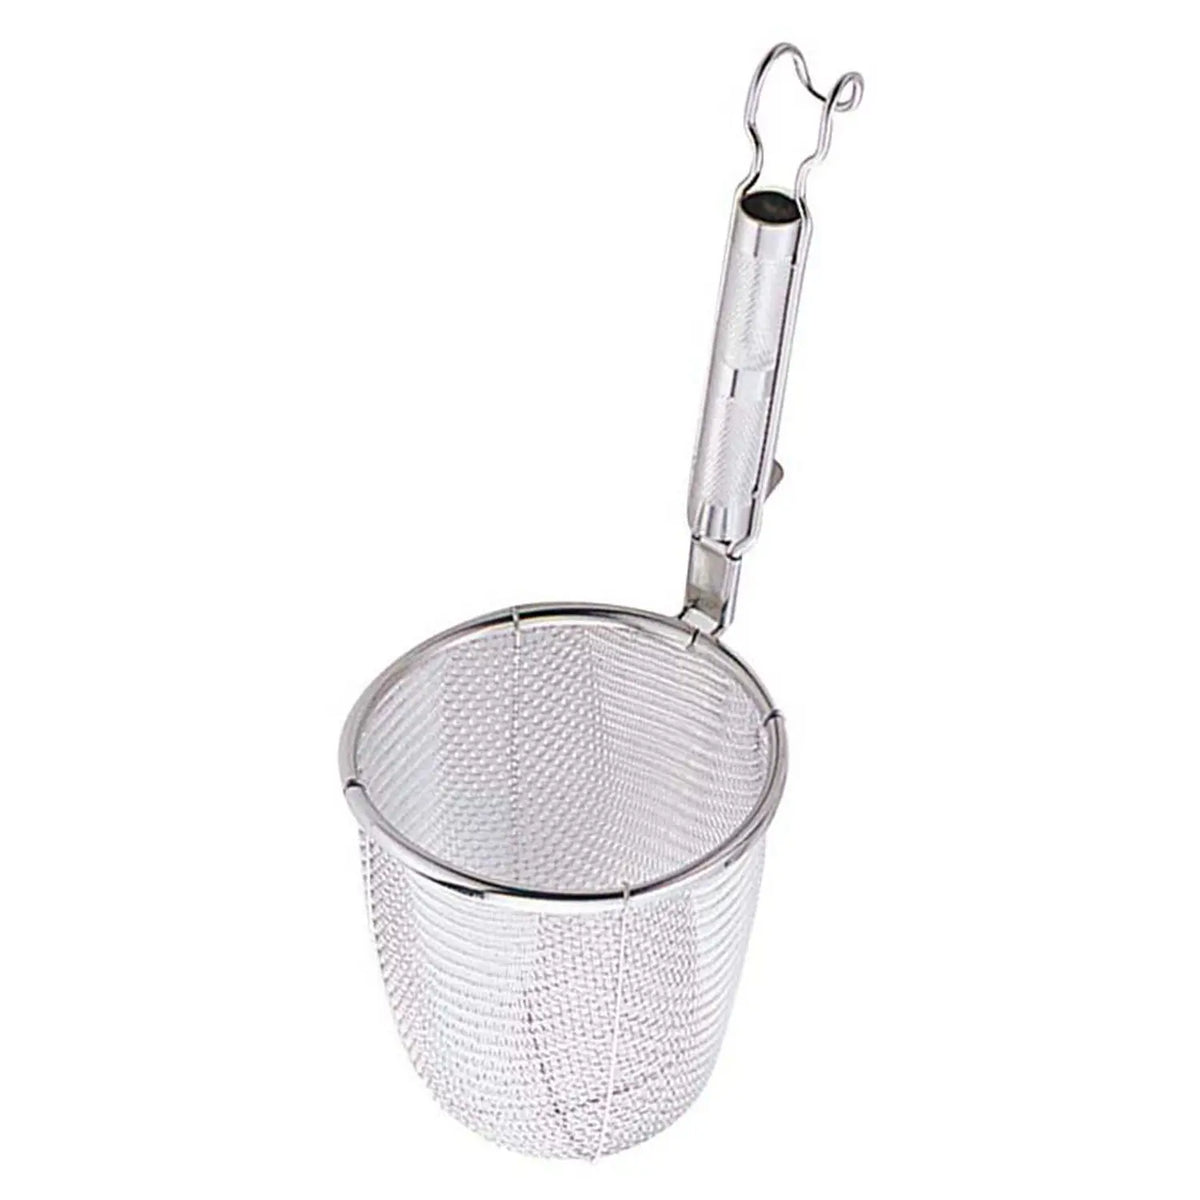 Three Snow Stainless Steel Tebo Noodle Strainer Round Base with Metal Handle